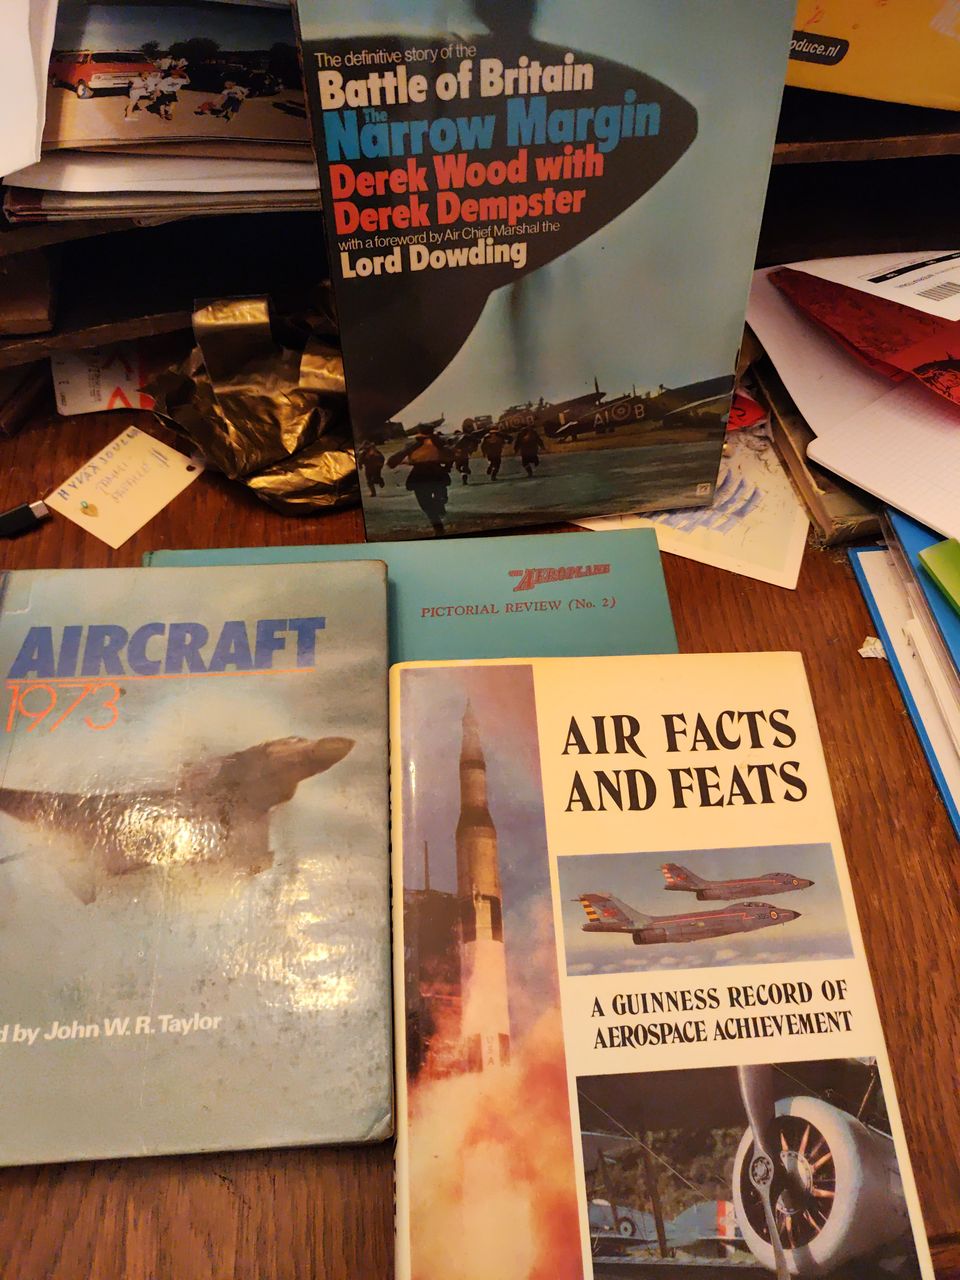 Air facts and feats-Aircraft 1973-Aeroplane-Battle of Britain